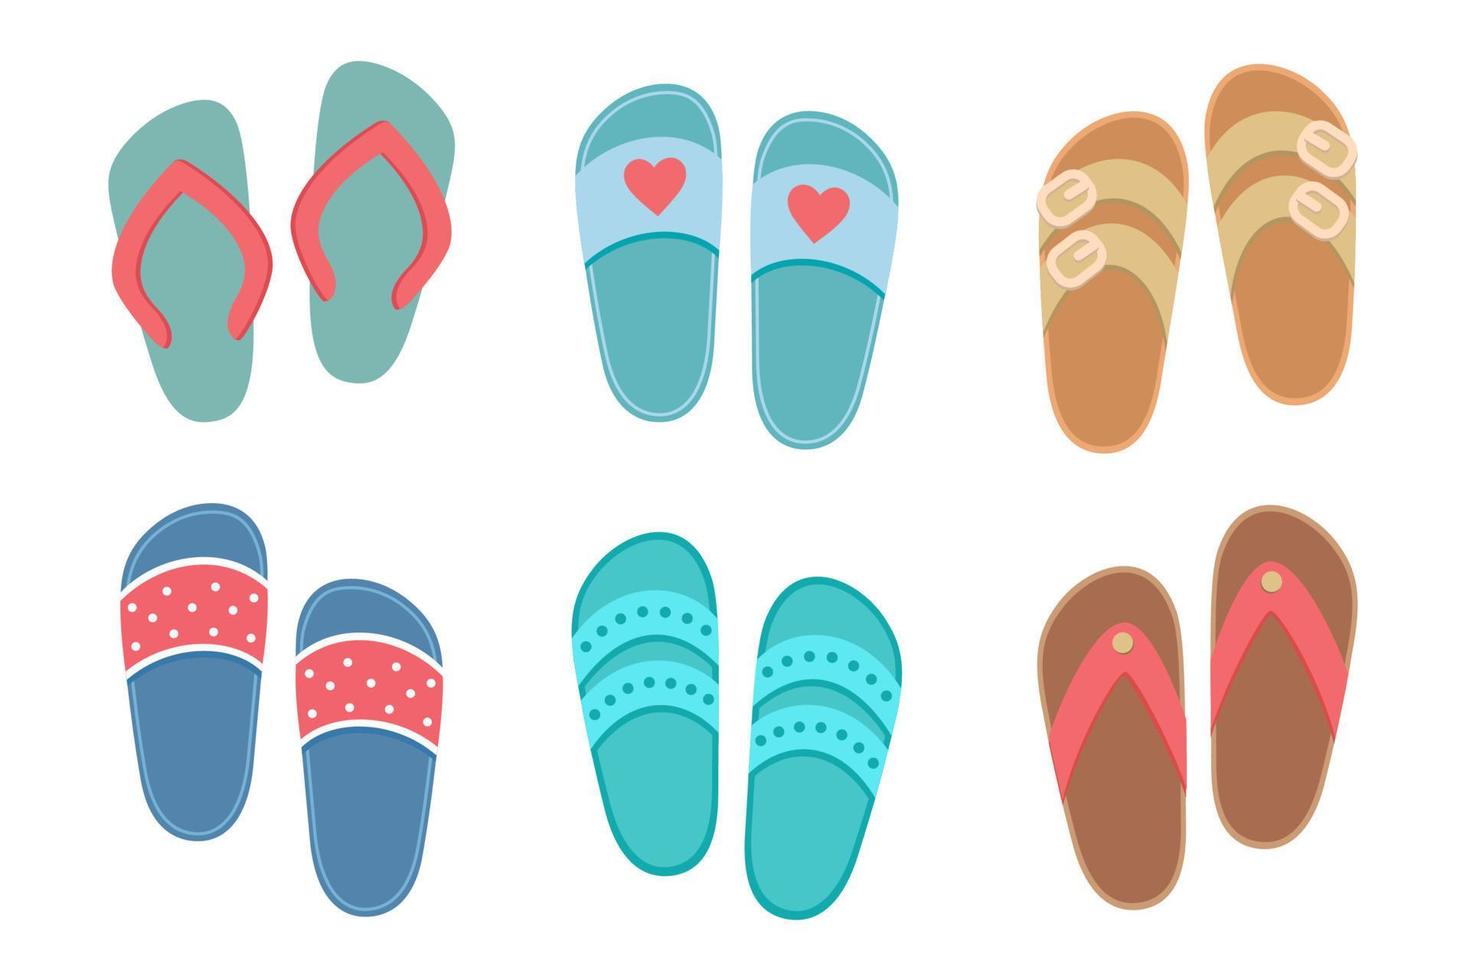 Flip flops set, collection of cute colorful female shoes for summer design. Vector cartoon illustration isolated on white. Flat design.